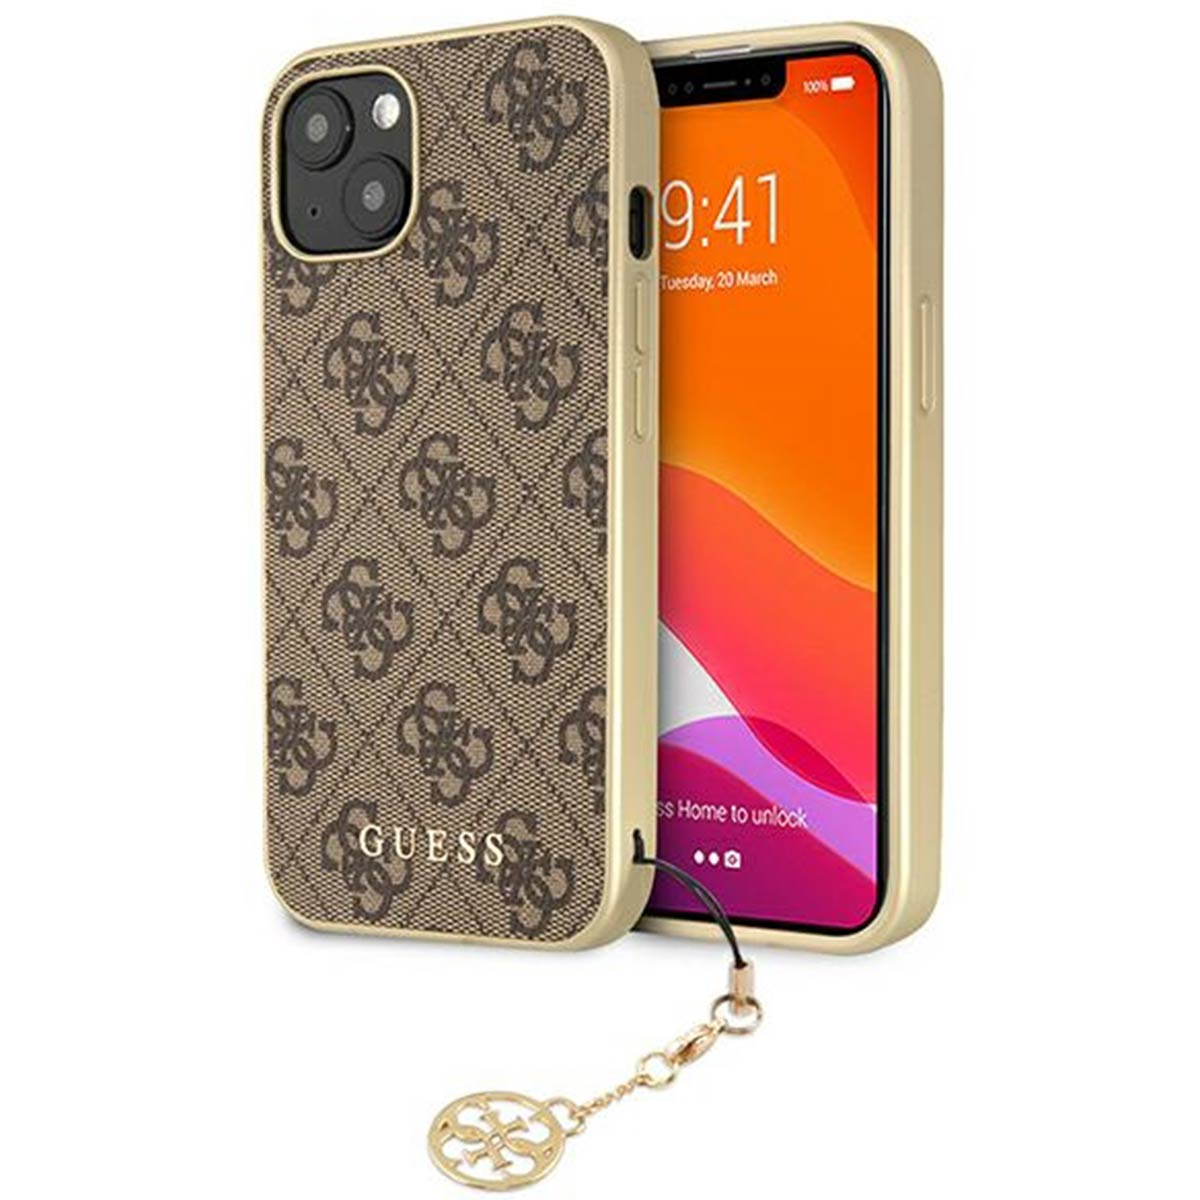 4G Braun iPhone Kette Hülle / 14 Case Gold Plus, + GUESS Anhänger, Backcover, Hard Apple, Charms